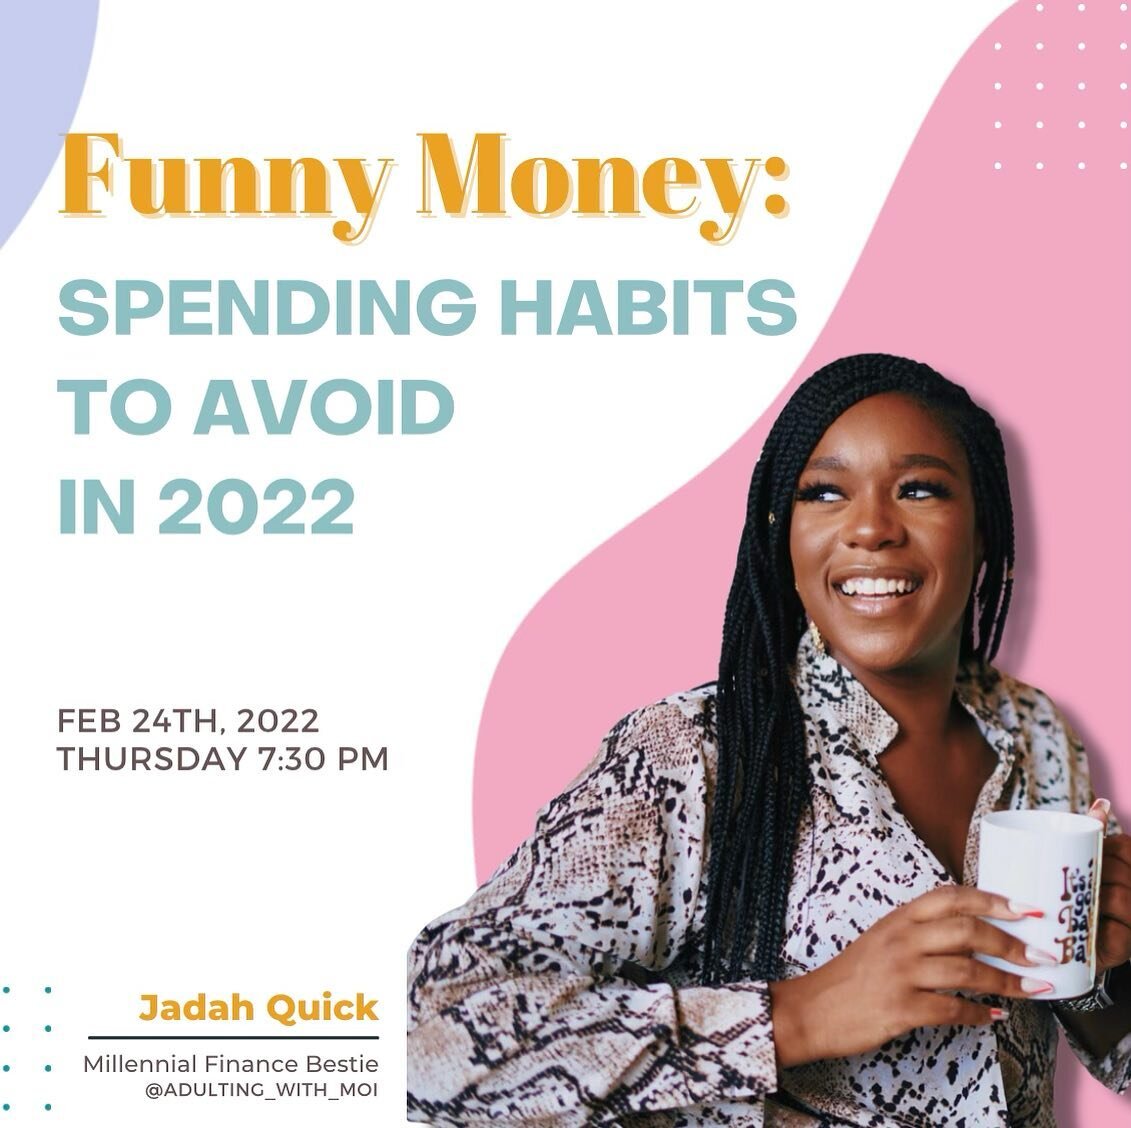 Join me for my upcoming webinar to break down the habits that are holding your budget back from greatness. Click the link in the bio to reserve your seat!

#adultingwithmoi #financewebinar #blackwealth #budgetplanner #budgeting #blackownedbusiness #b